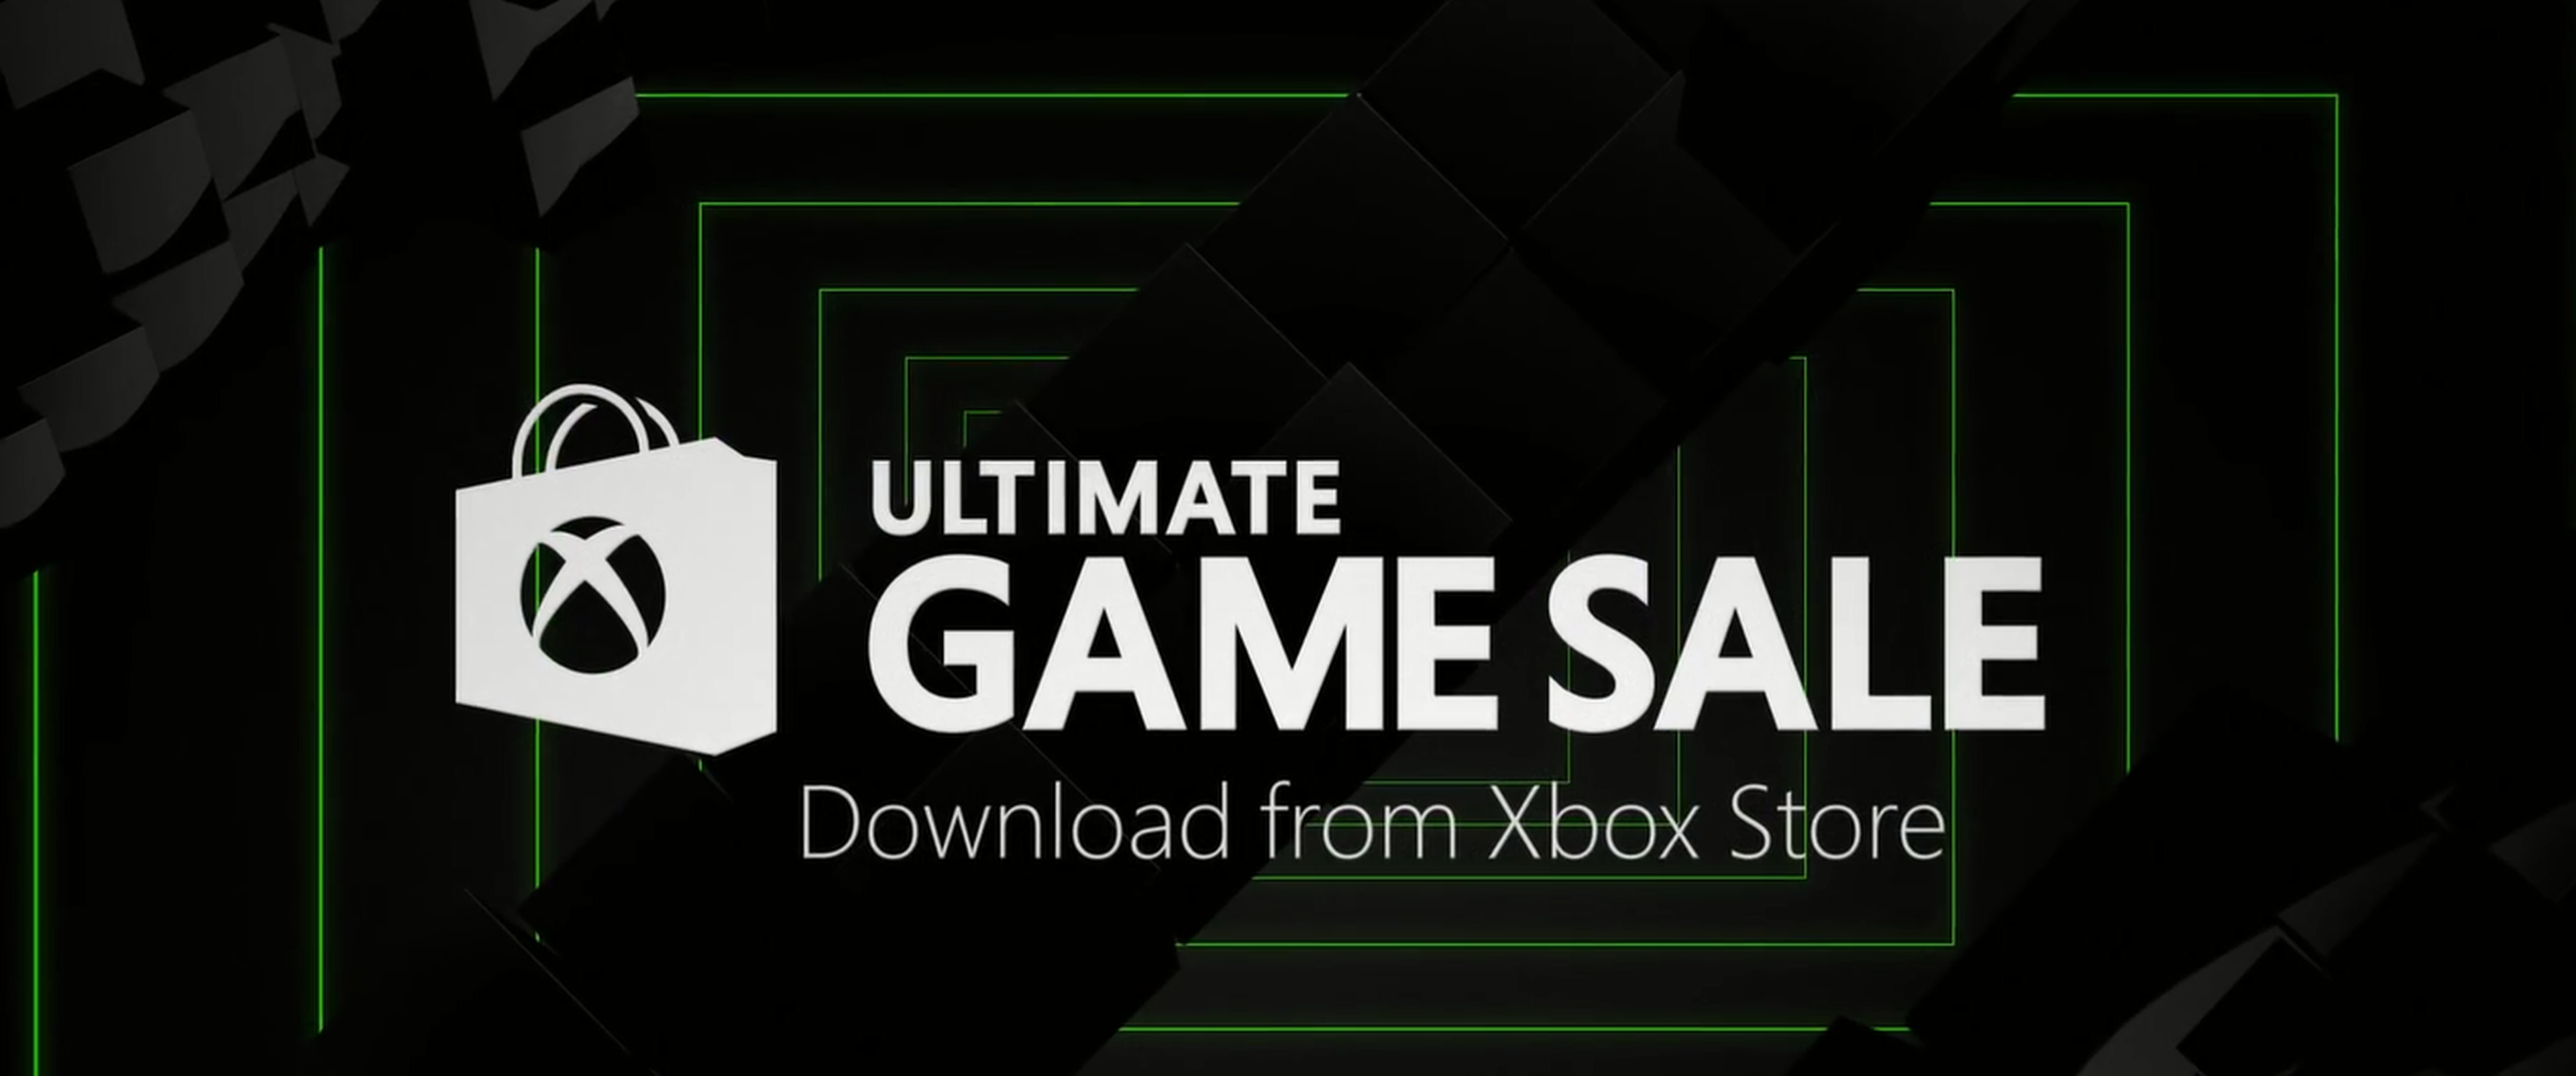 Xbox Store Ultimate Game Sale Video